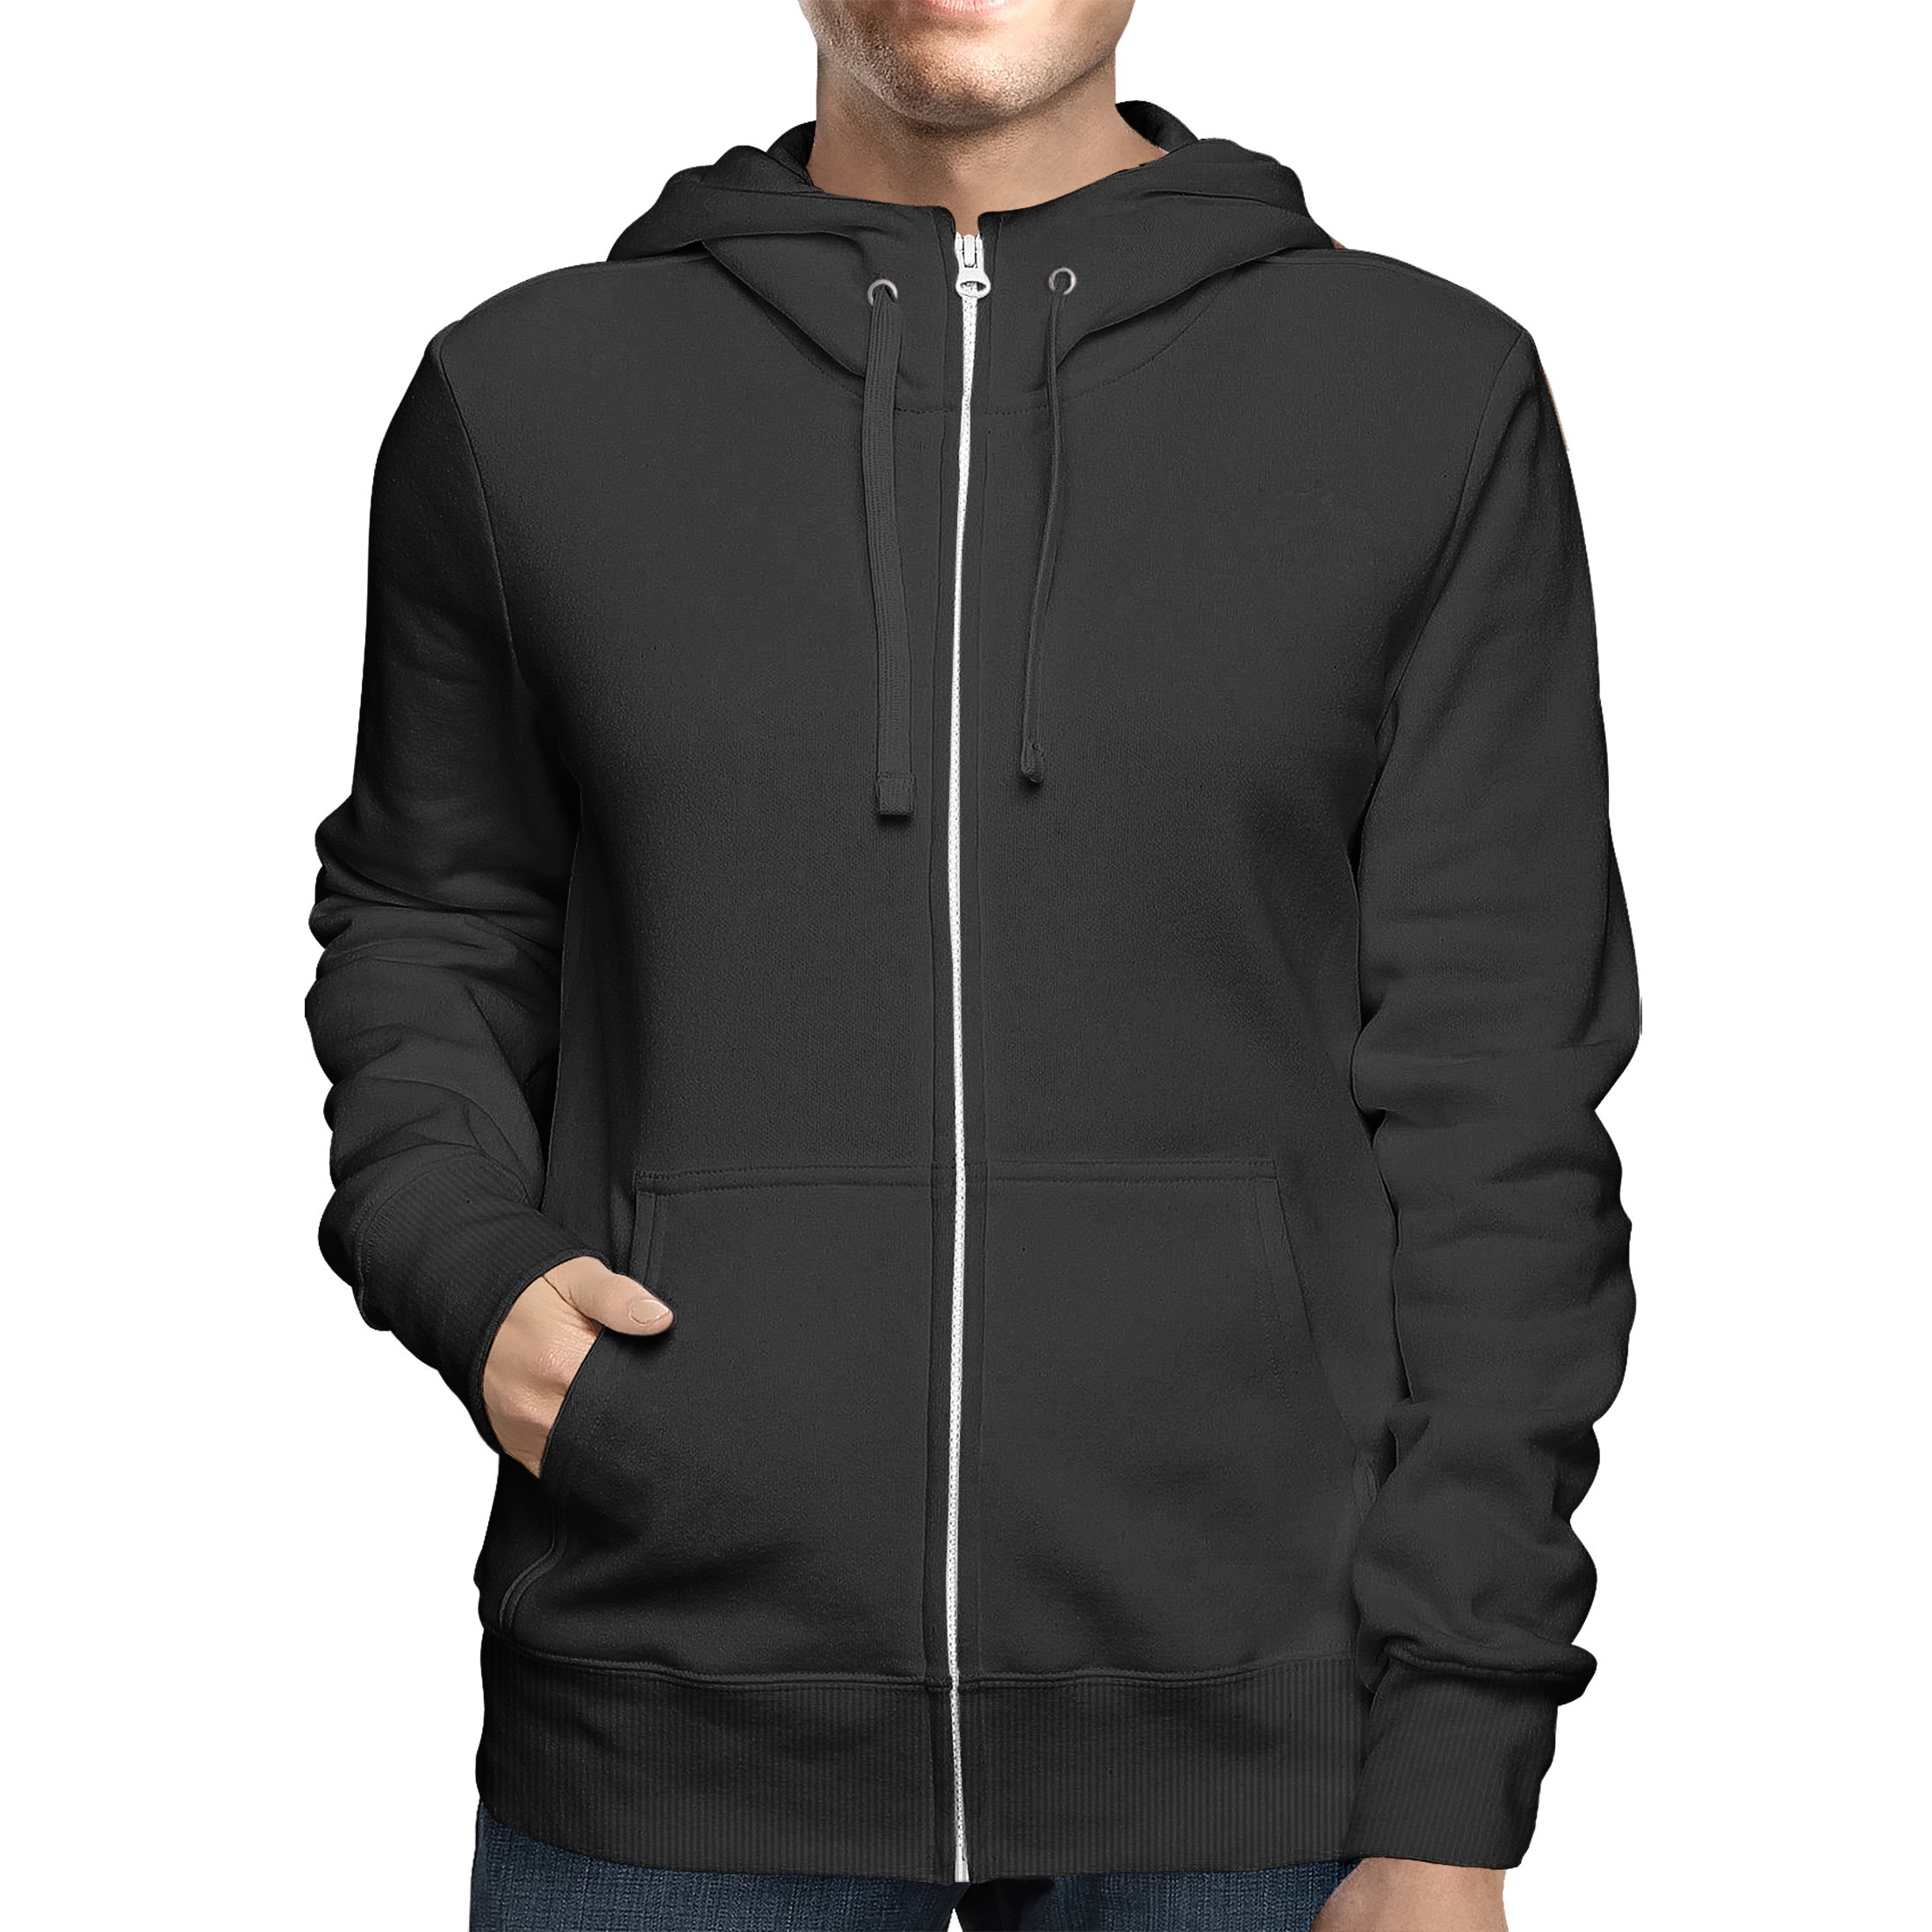 2-Pack: Men's Full Zip Up Fleece-Lined Hoodie Sweatshirt (Big & Tall Size Available) - Black, 4x-large